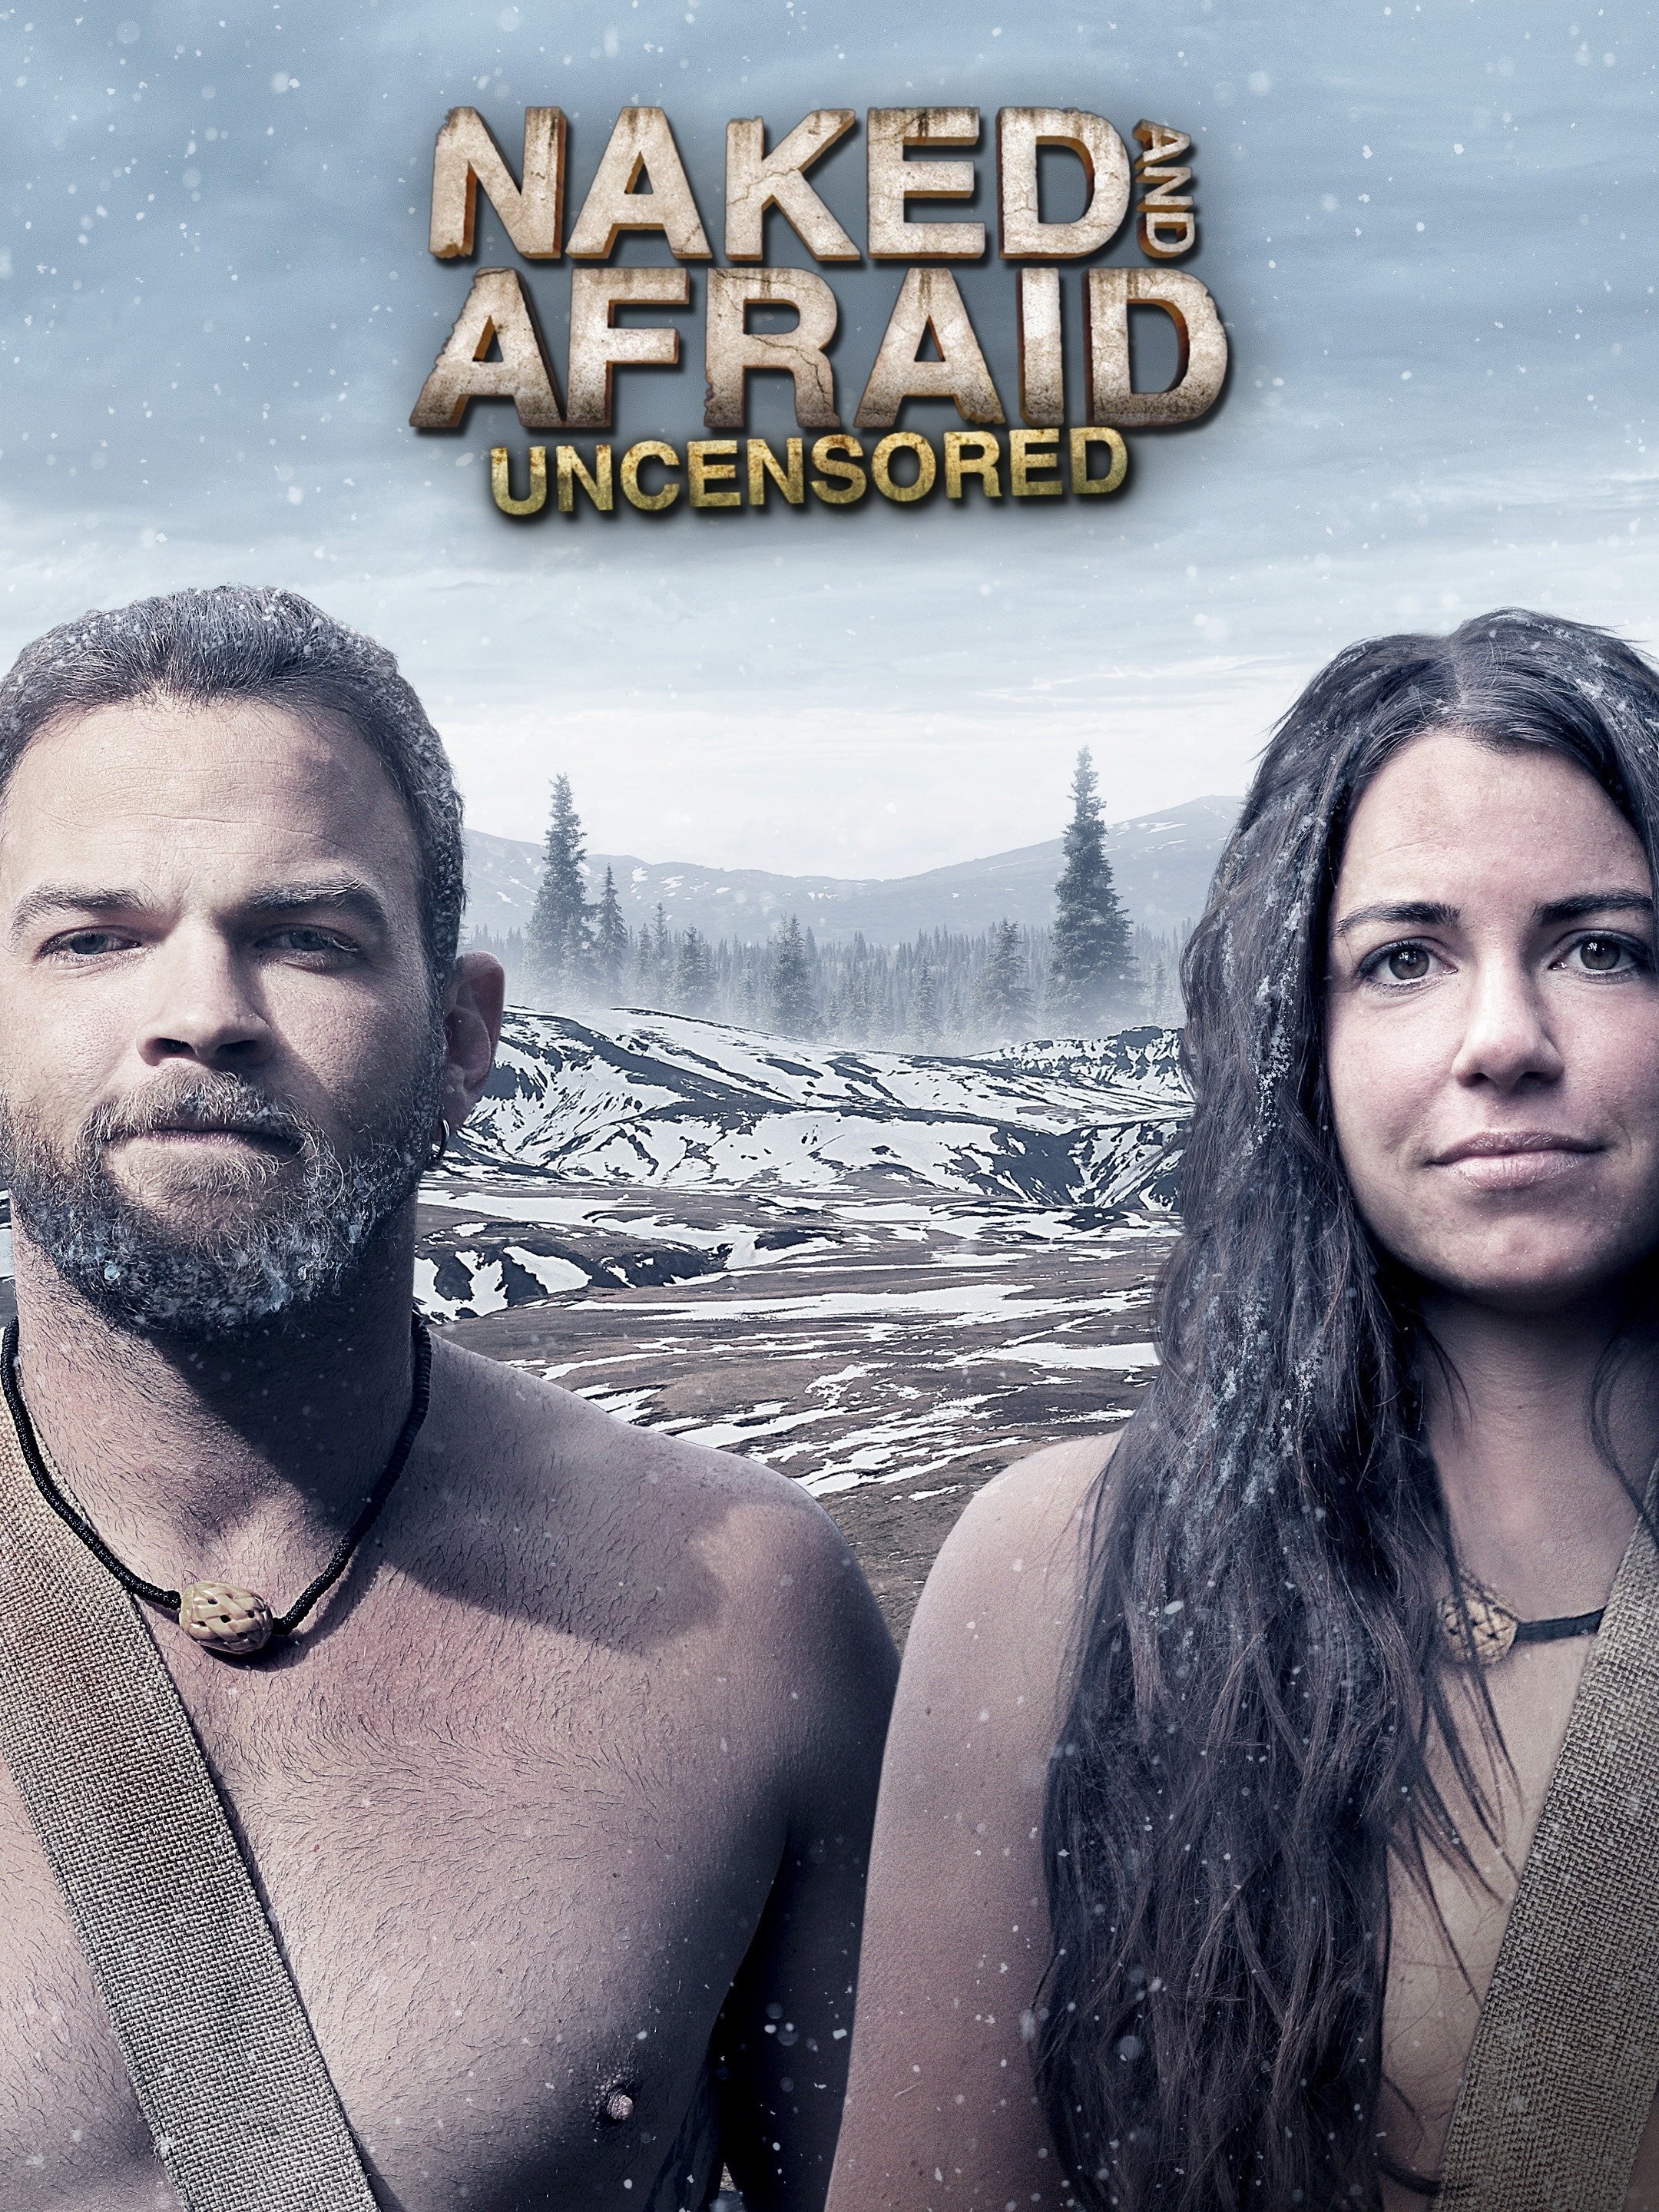 andy renee share naked and afraid uncensered photos